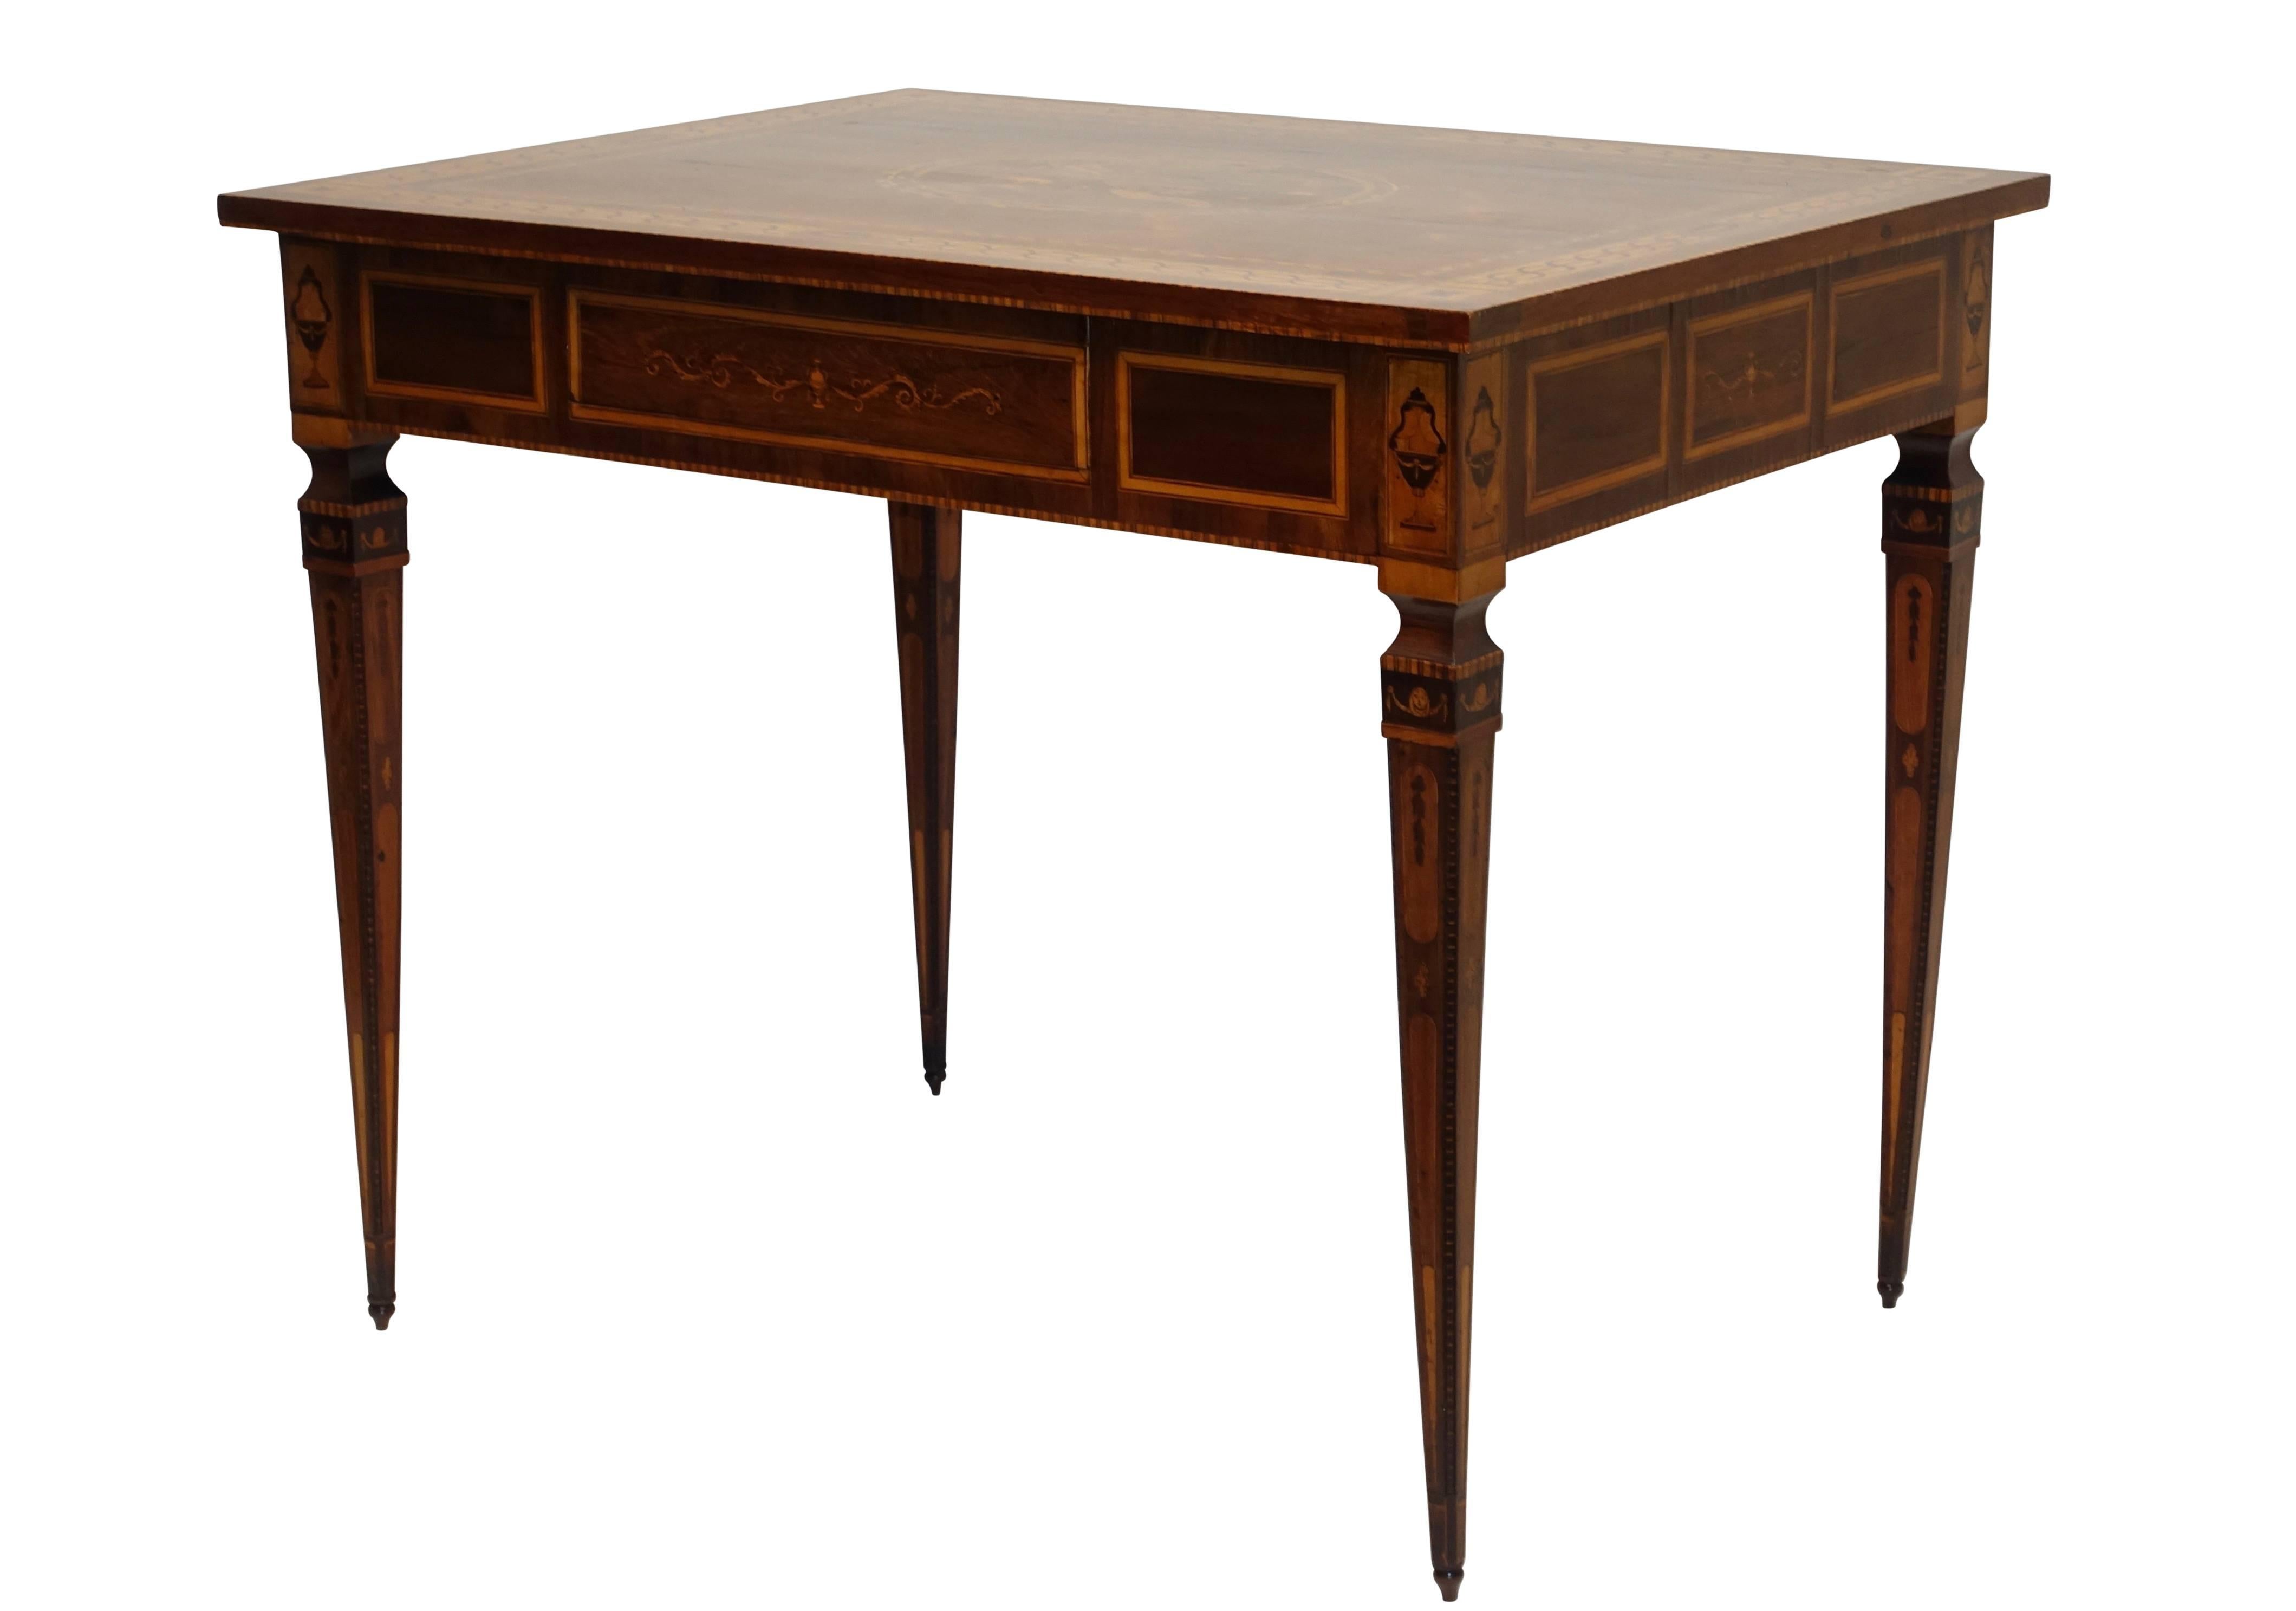 Mixed Woods Marquetry Inlaid Writing Table, Northern Italian, Late 18th Century In Good Condition For Sale In San Francisco, CA